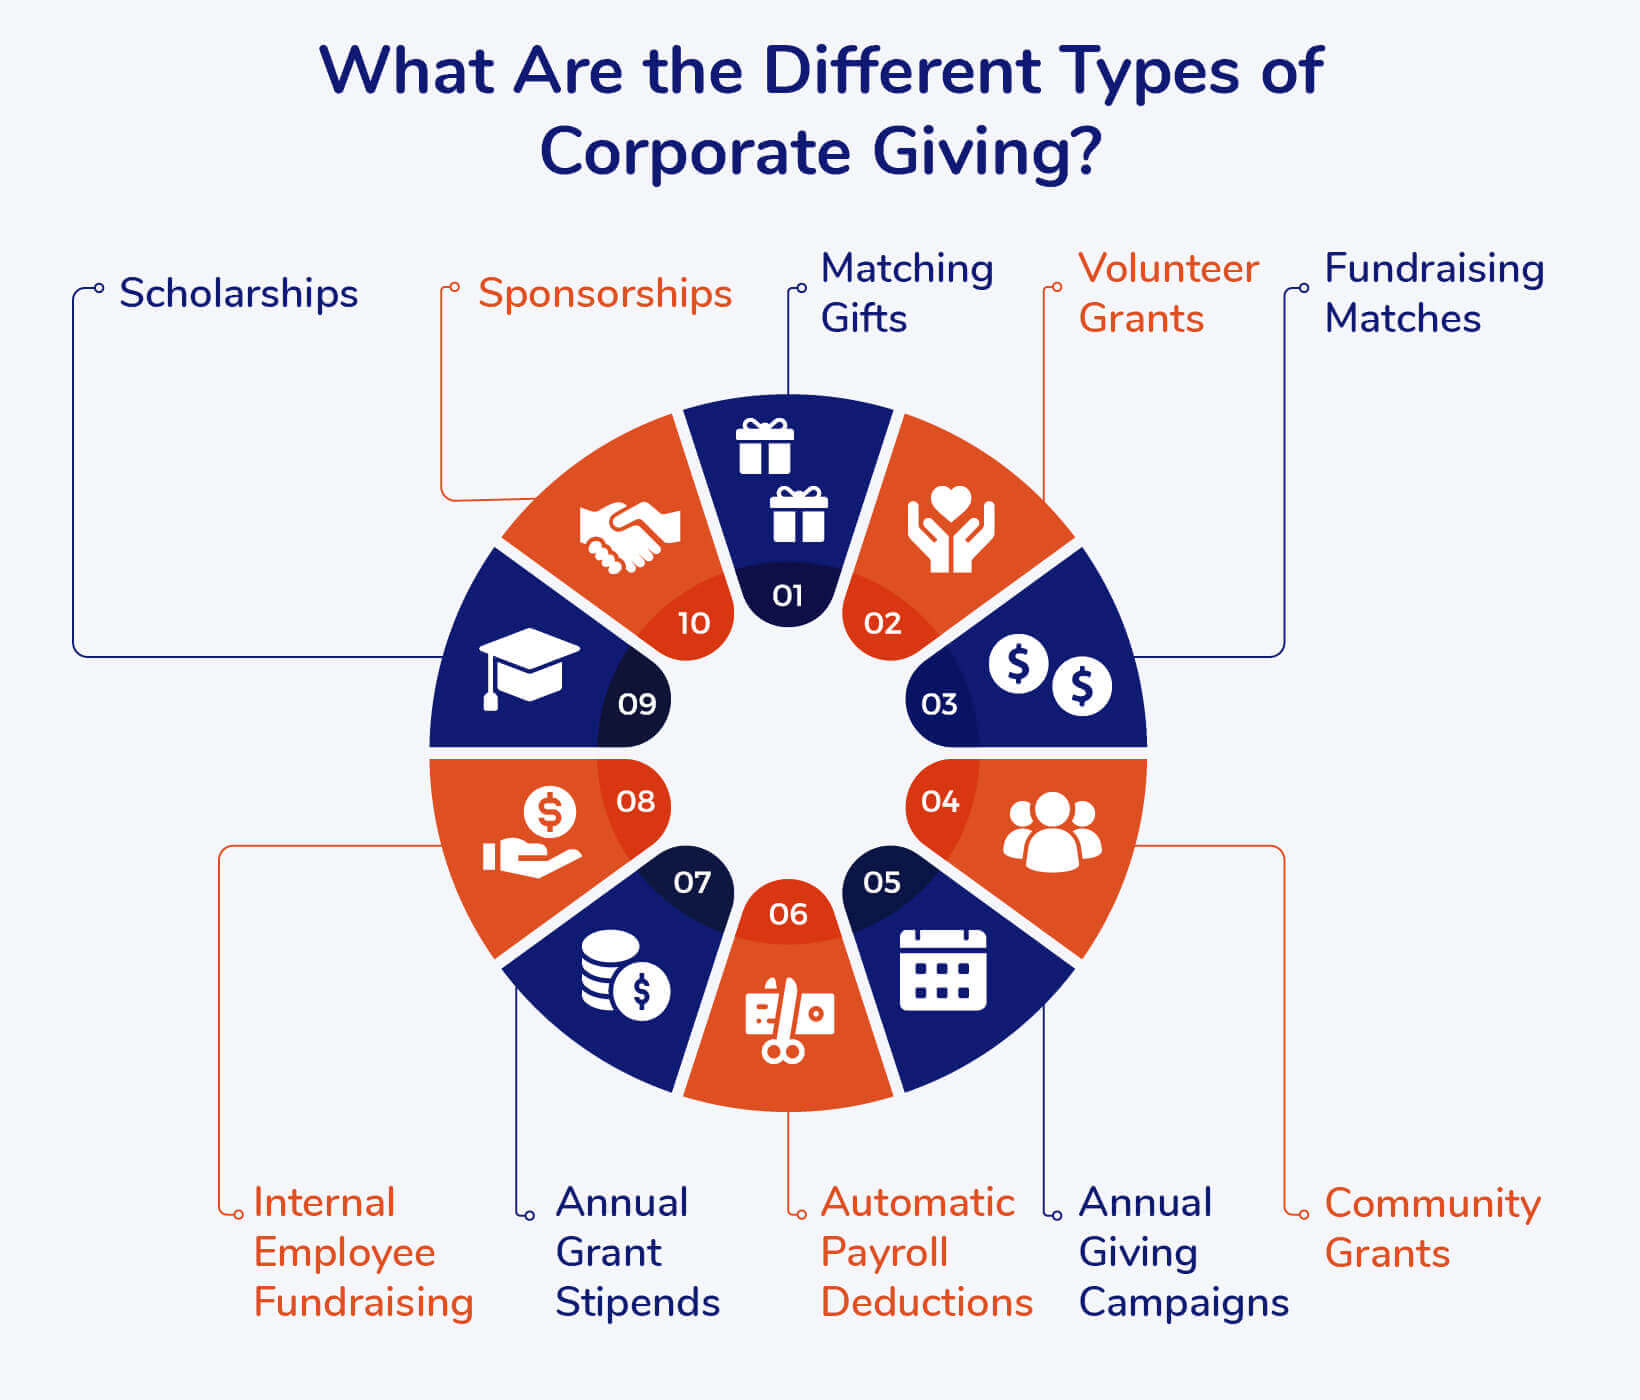 This image shows the different types of corporate giving, as outlined in the text below.